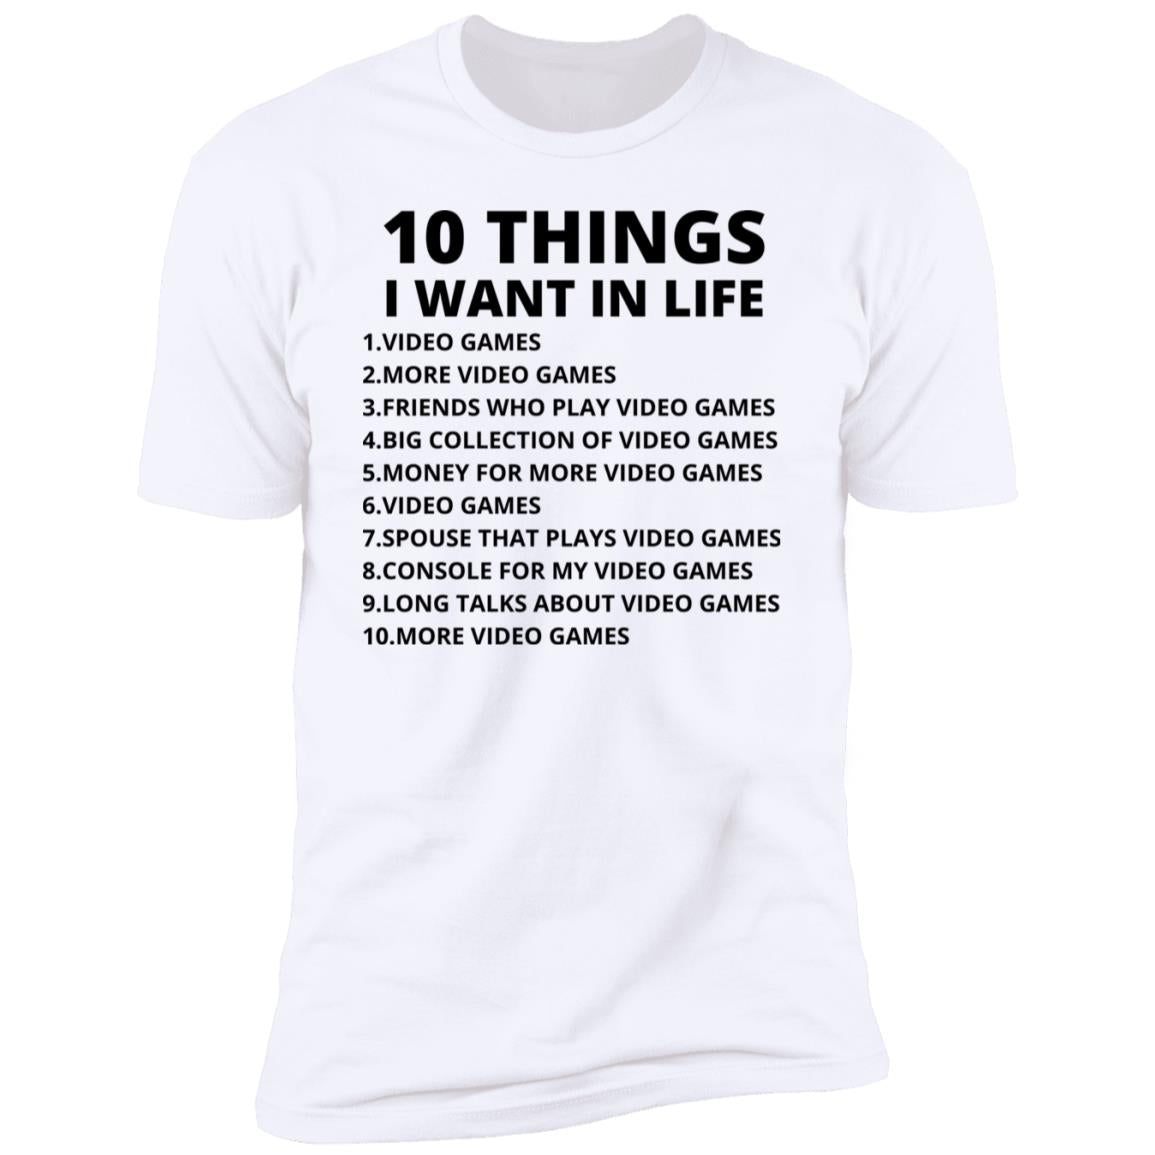 10 Things I Want In Life Shirt Funny VIDEO GAME VERSION